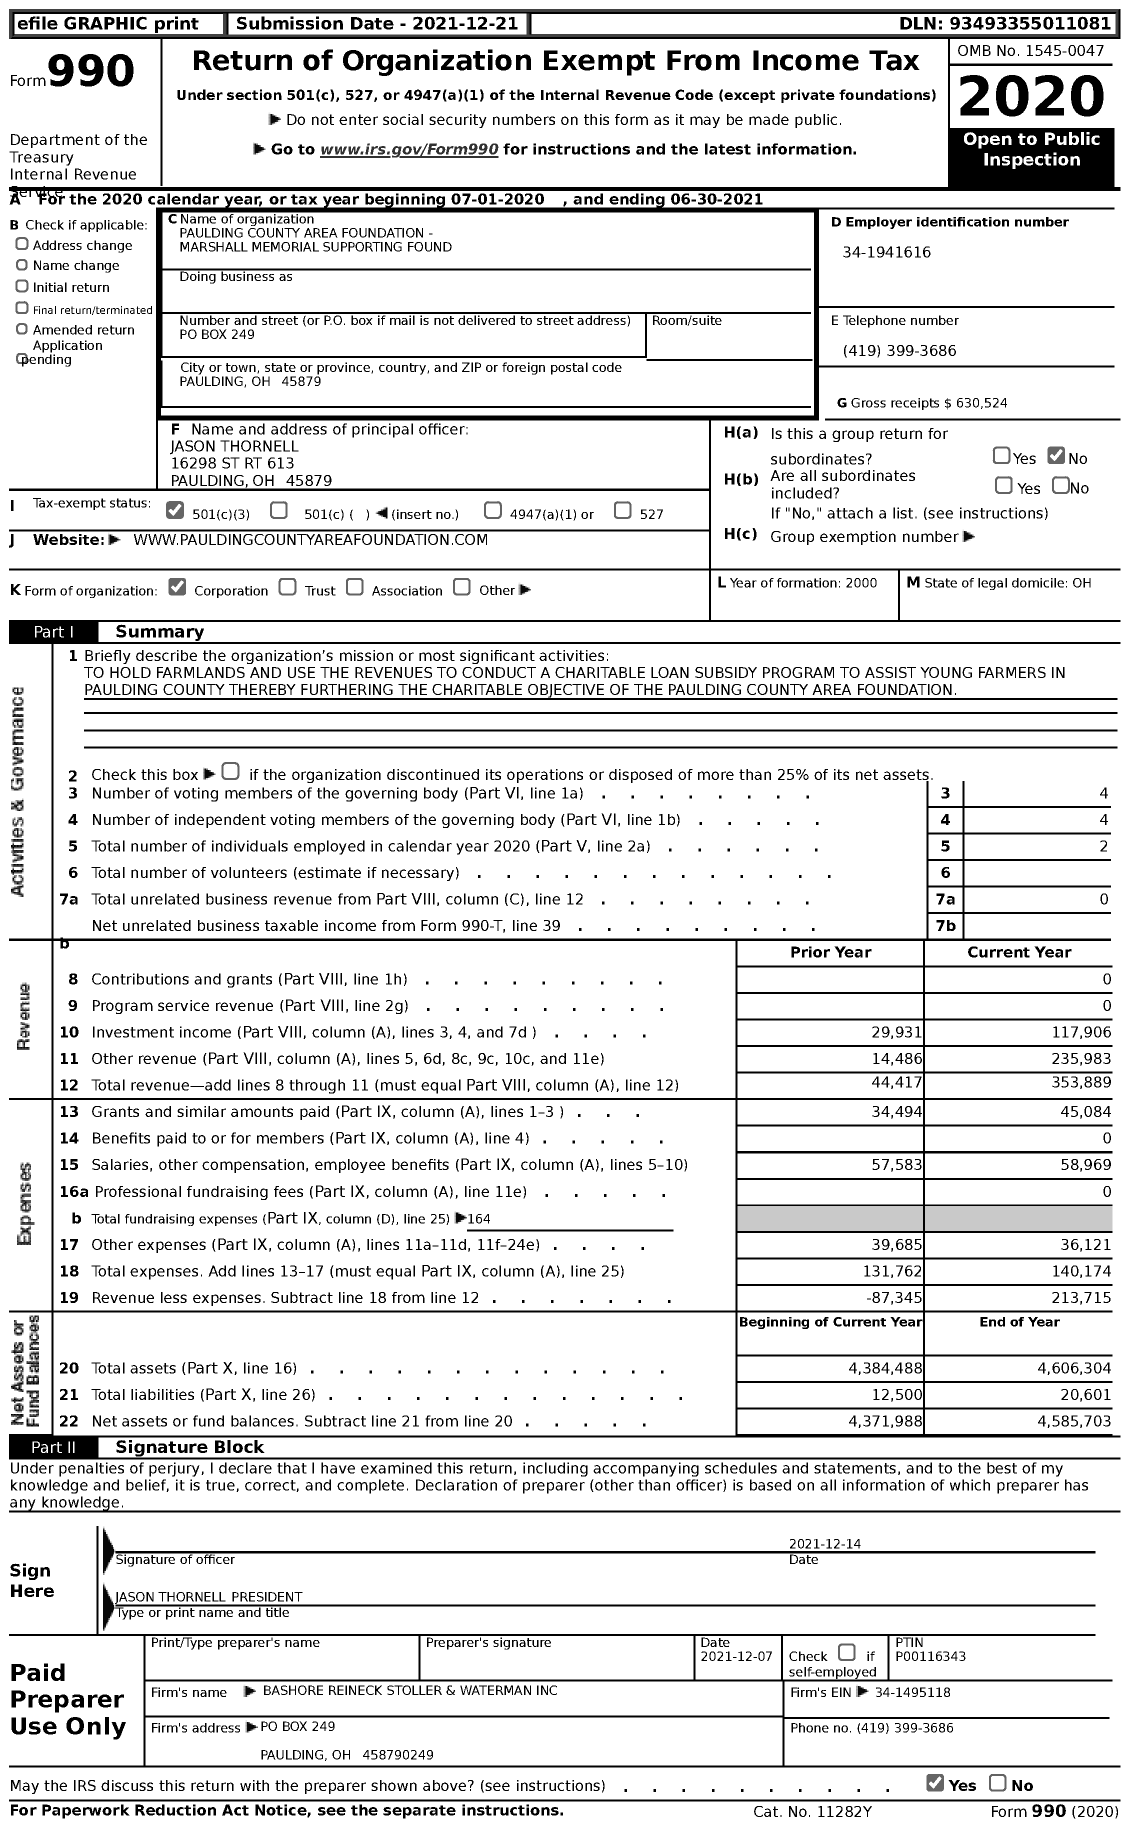 Image of first page of 2020 Form 990 for Paulding County Area Foundation - Marshall Memorial Supporting Found